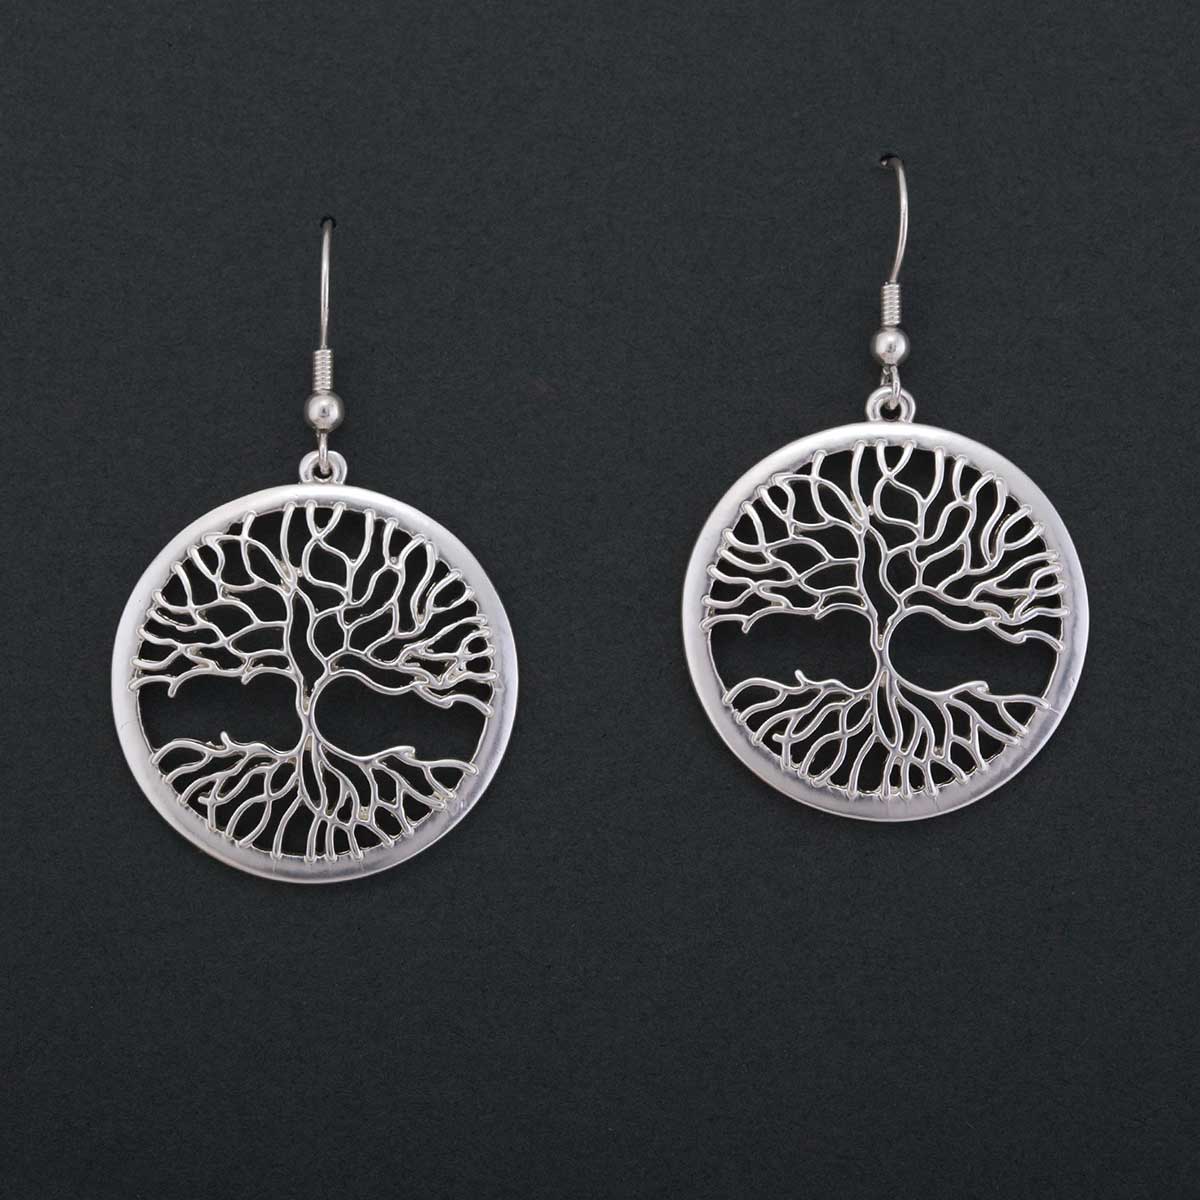 Satin Silver 1.25"x1.25" Tree of Life Disc French Wire Earrings